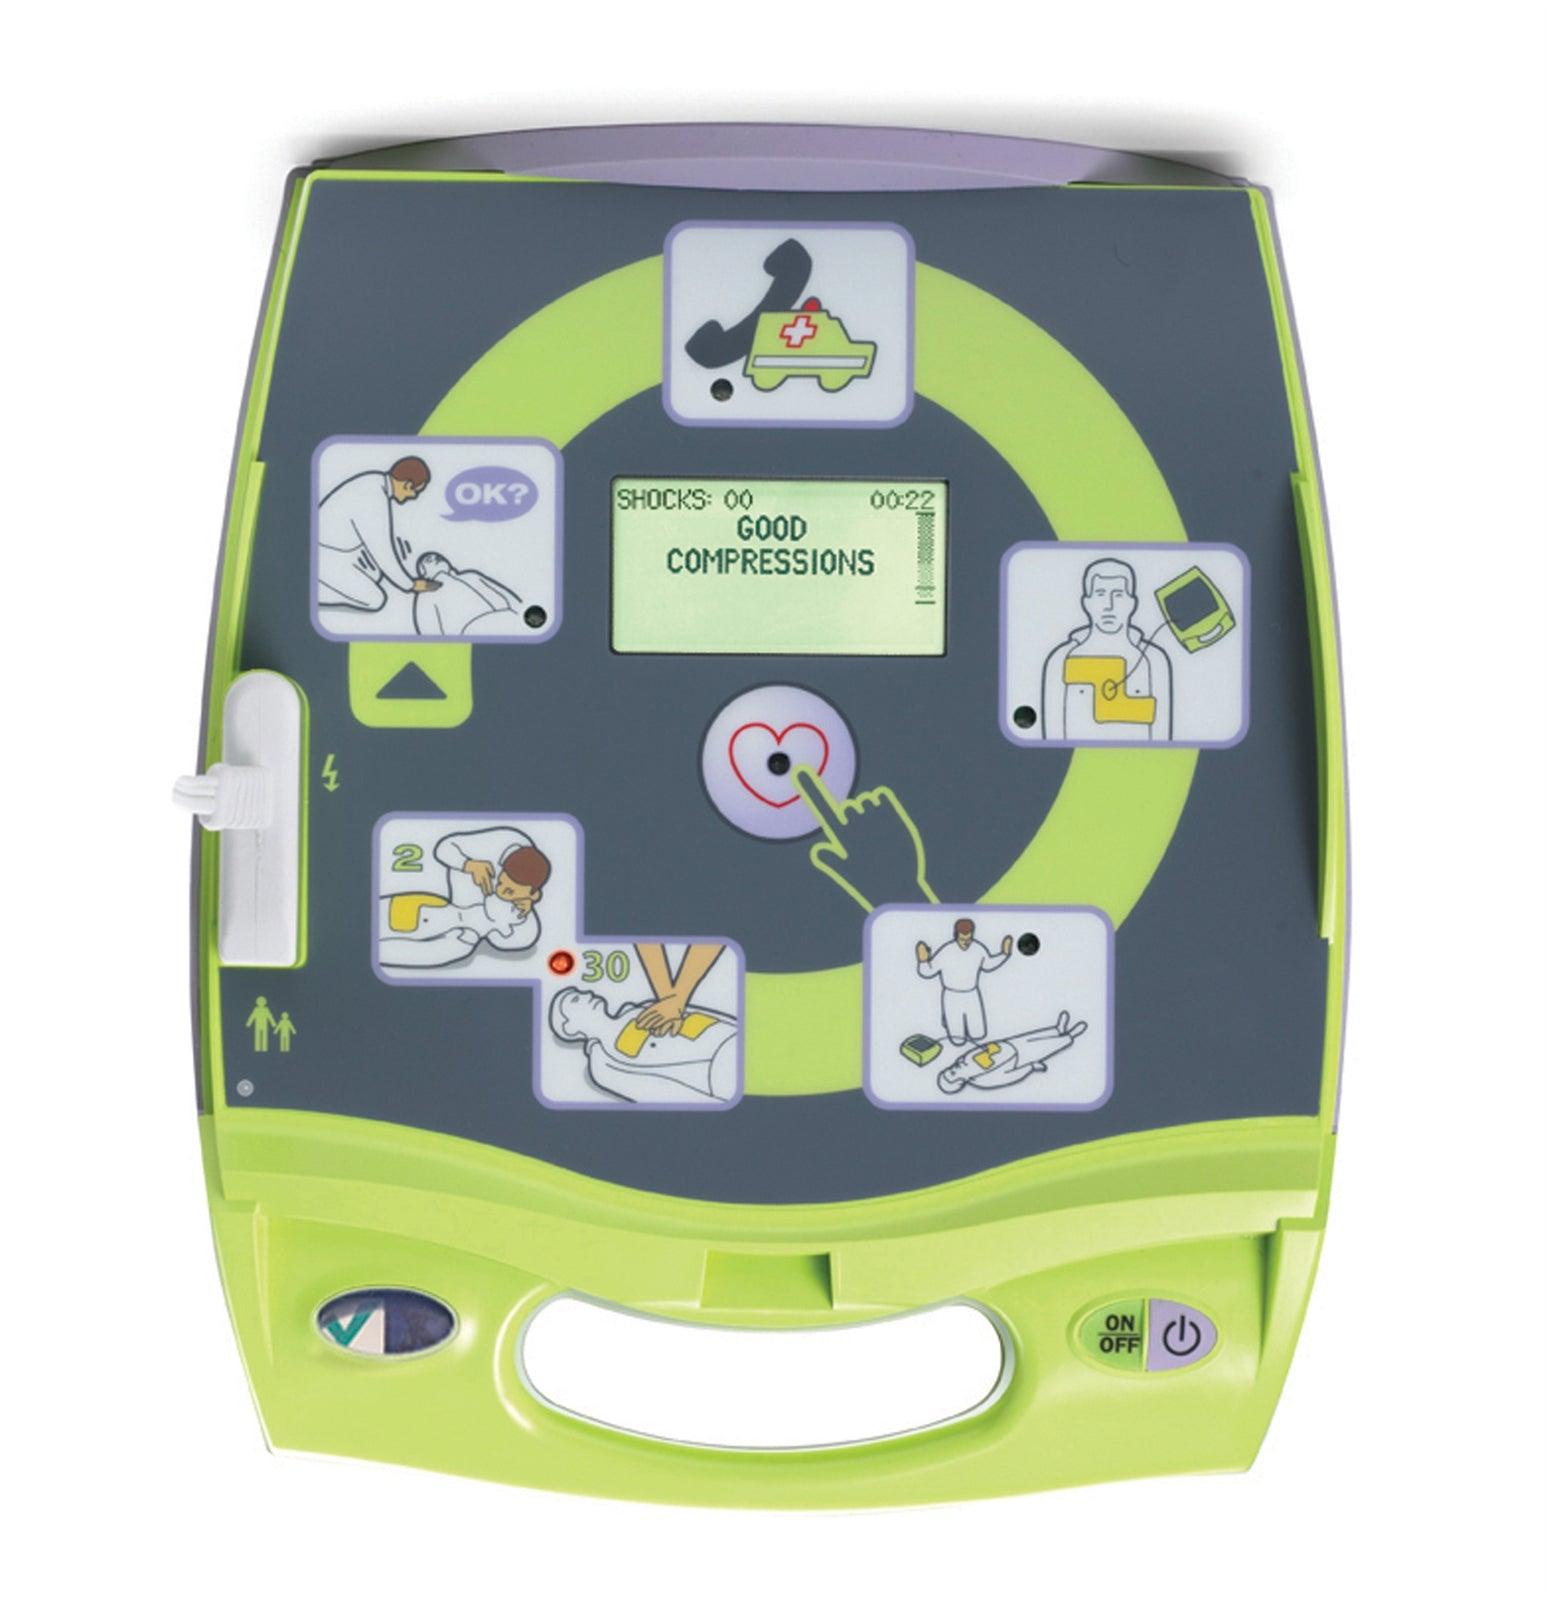 Zoll AED Medical Defibrillator Fully Automatic Package